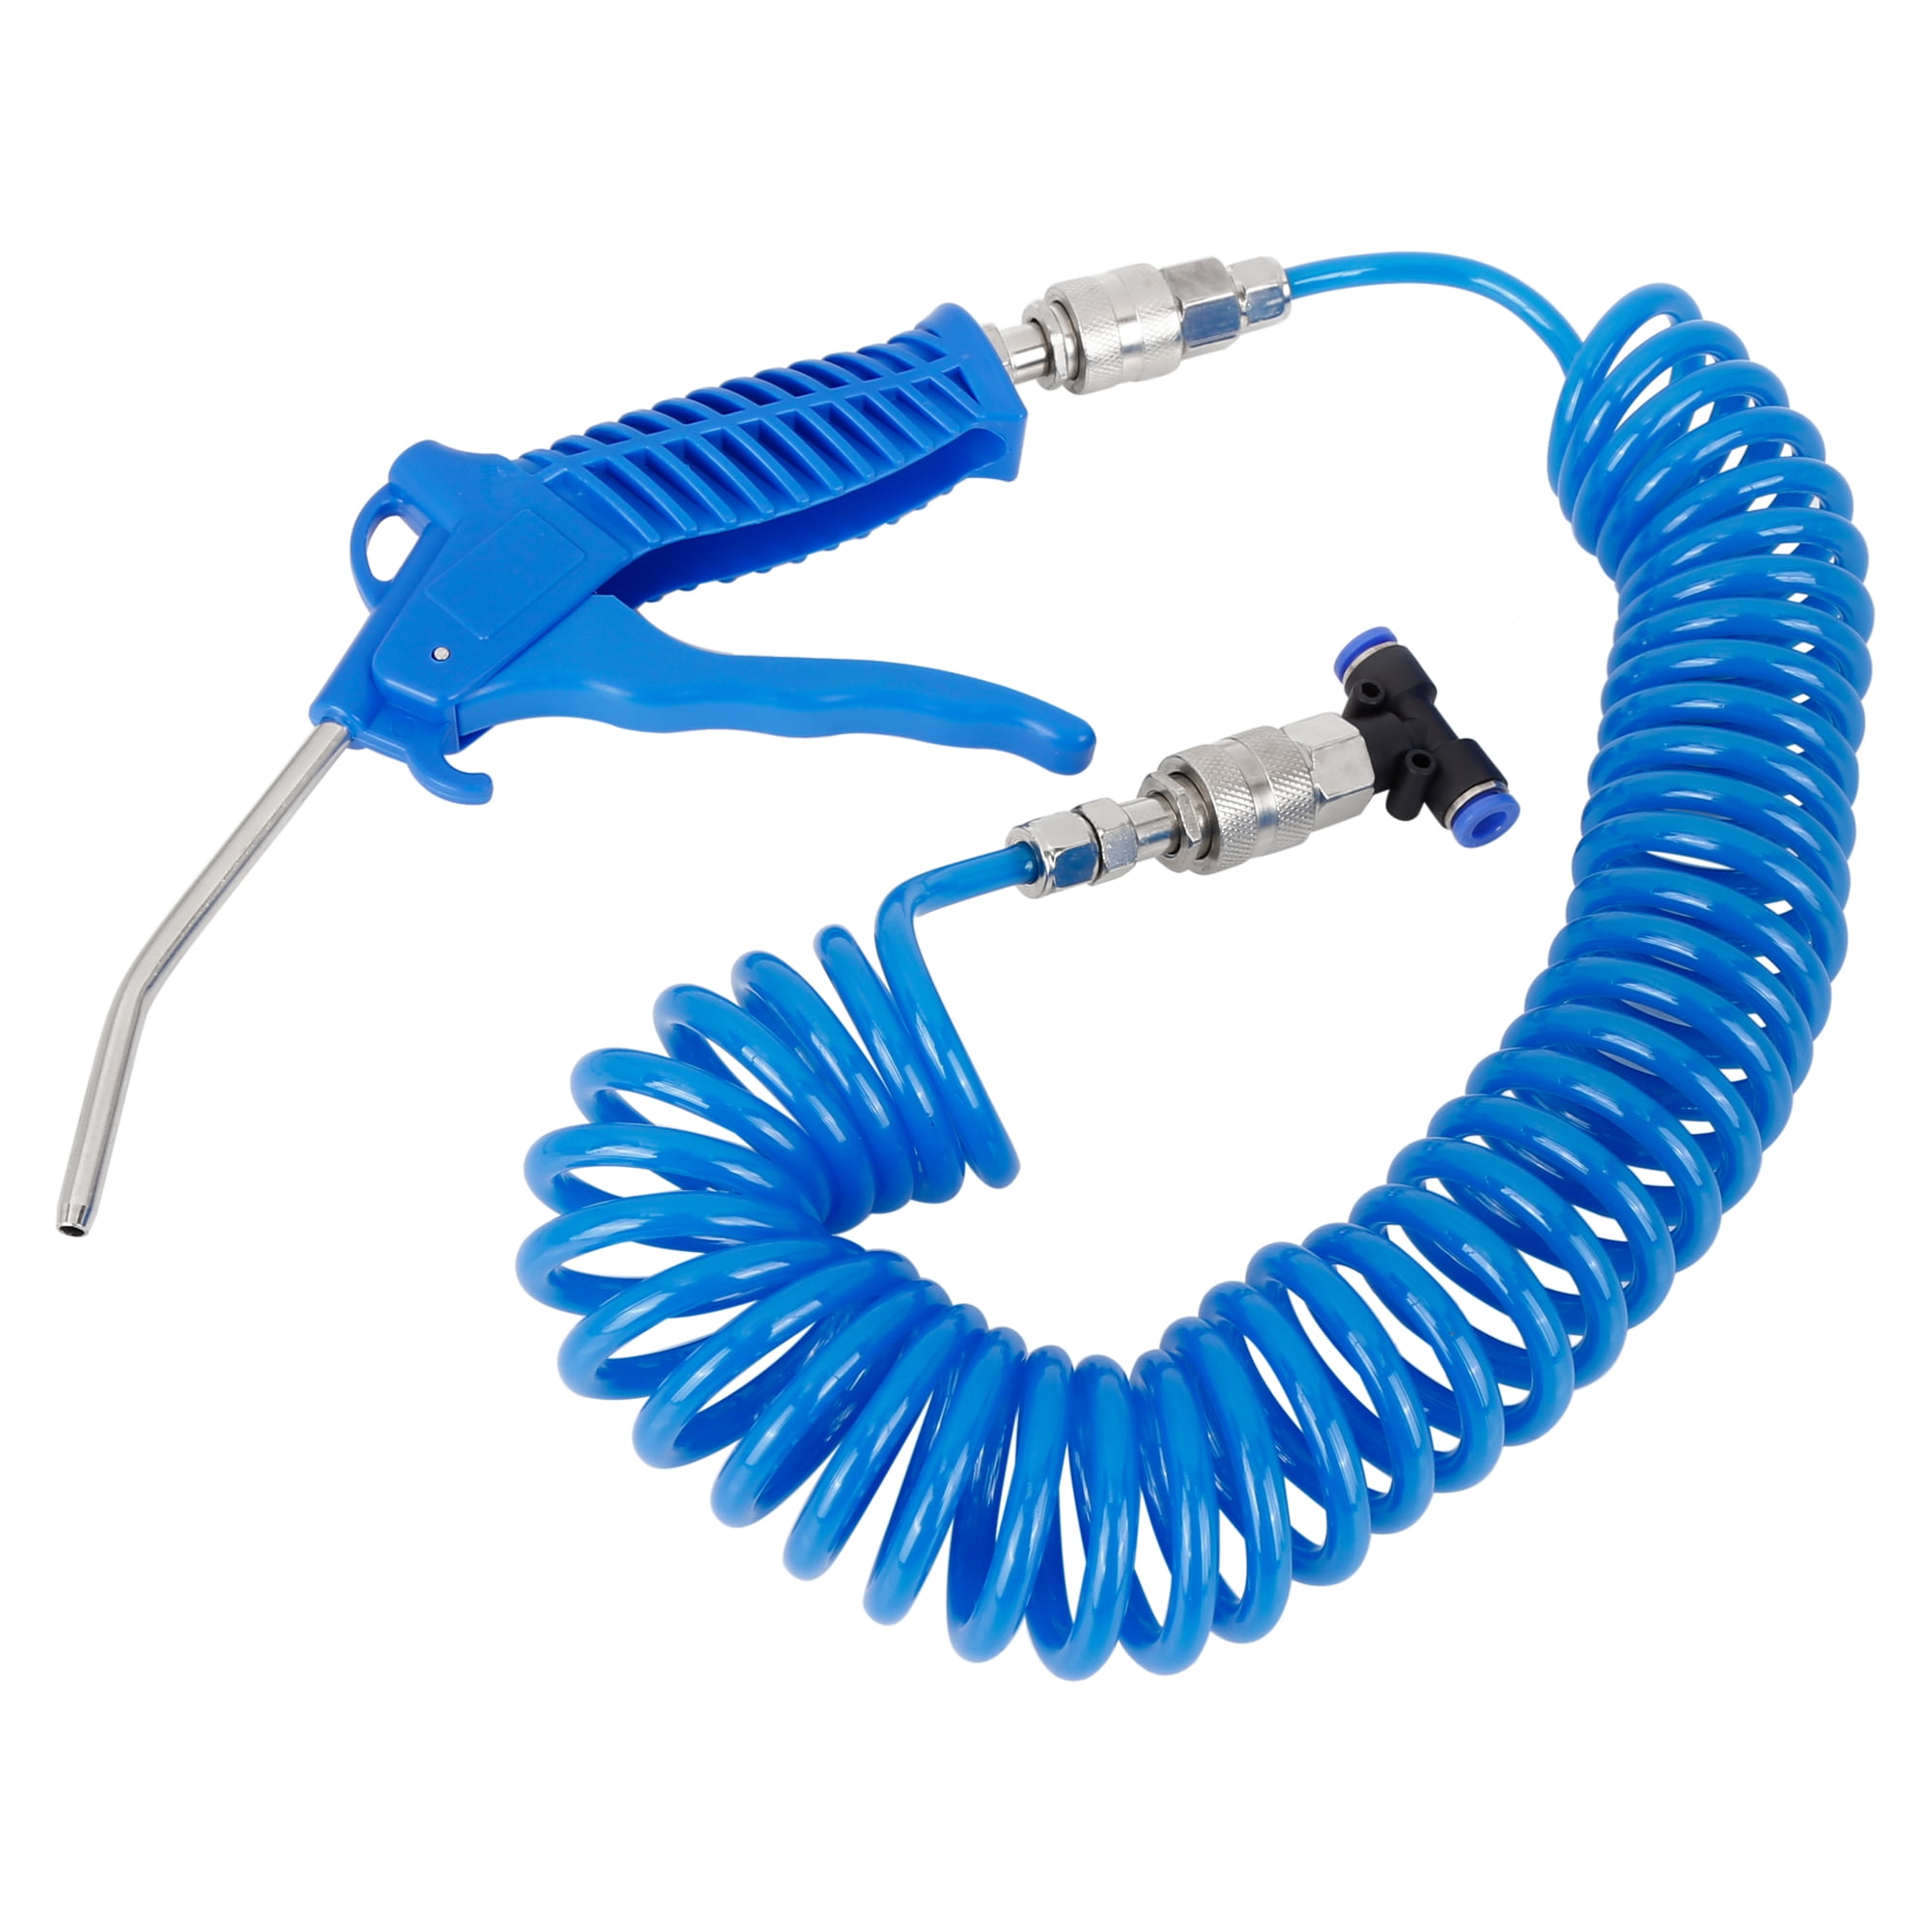 SCUBA Air Blower Duster with Recoil Hose 